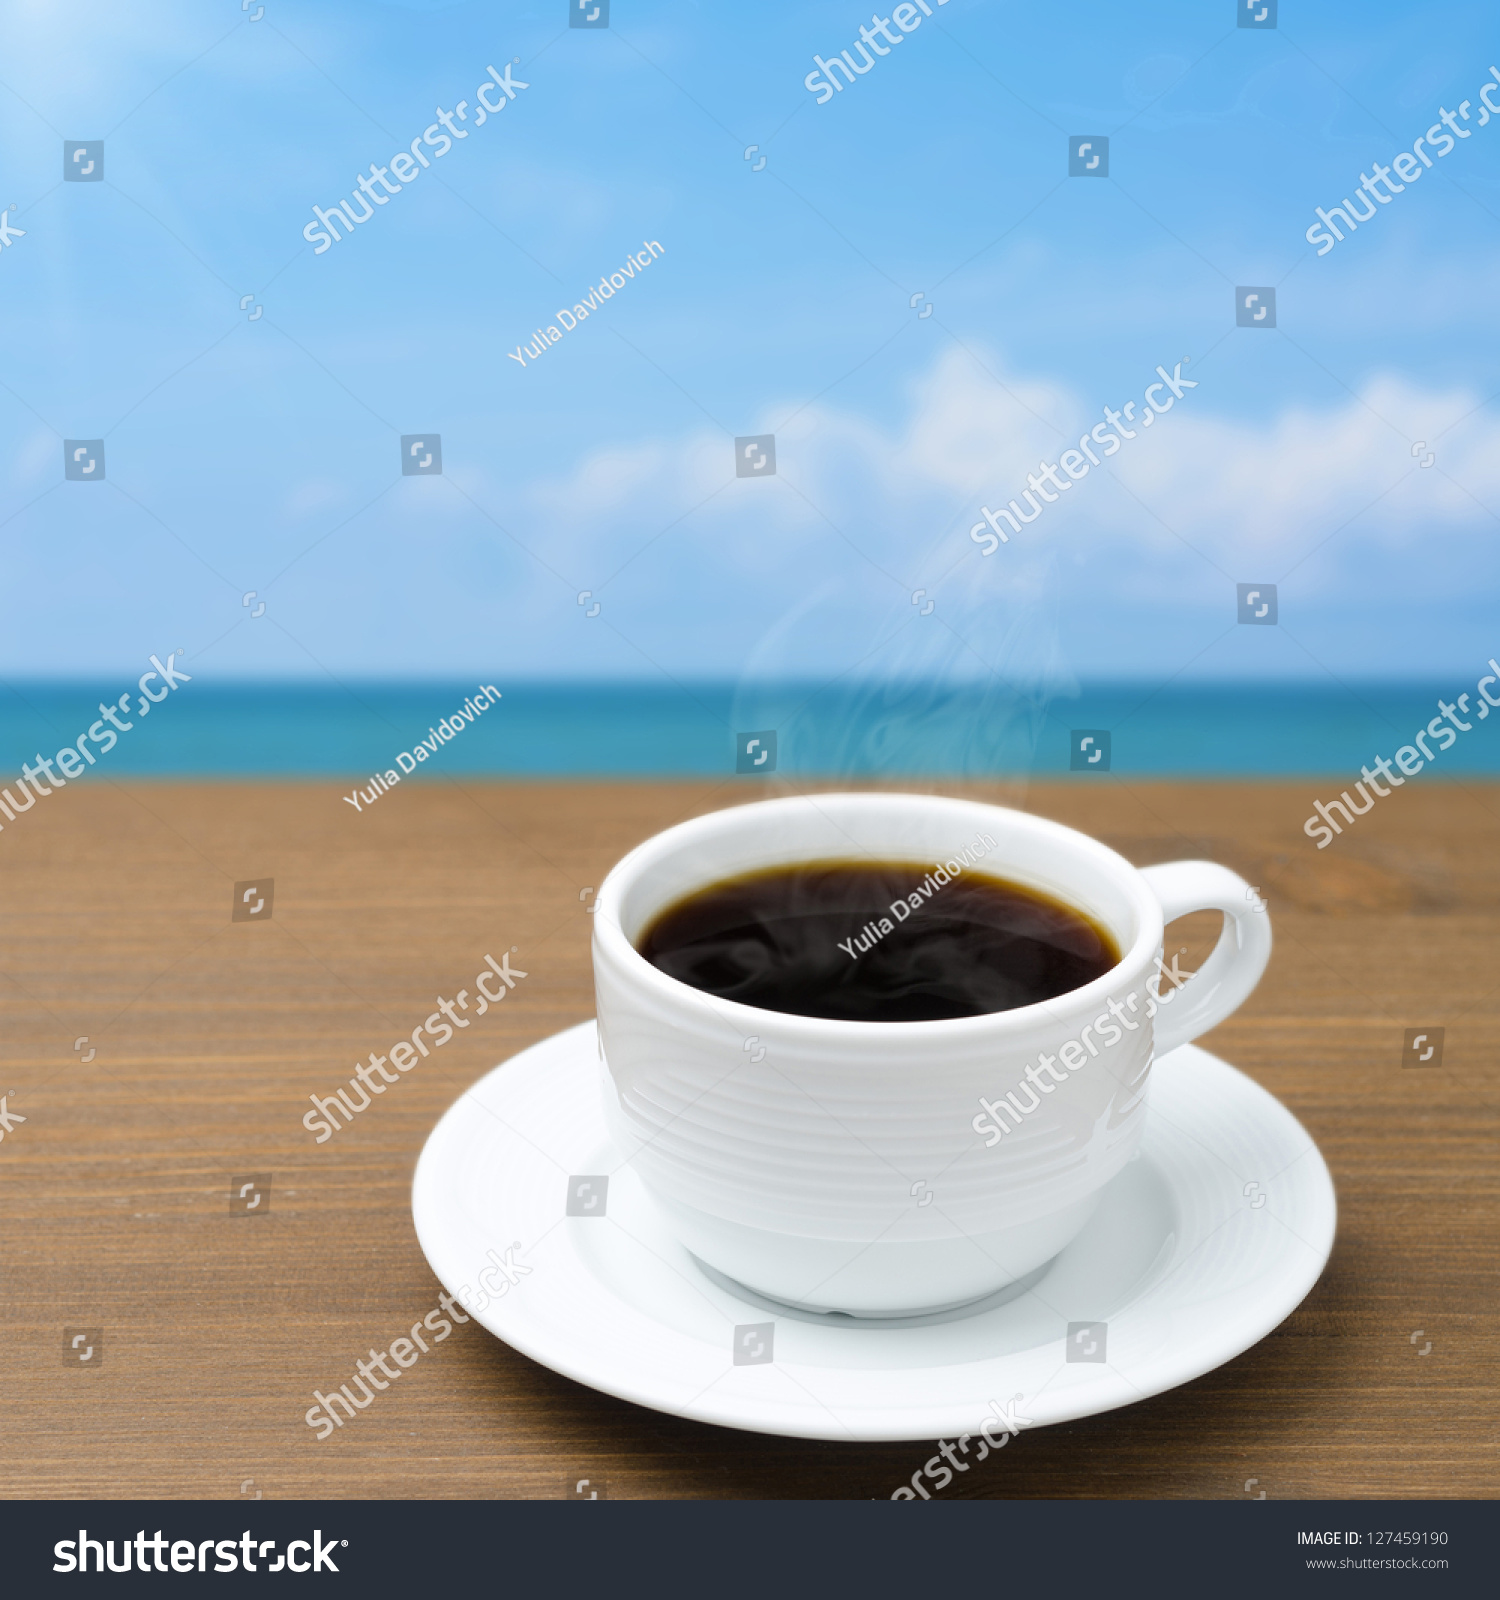 Cup Coffee Steam On Wooden Table Stock Photo 127459190 - Shutterstock